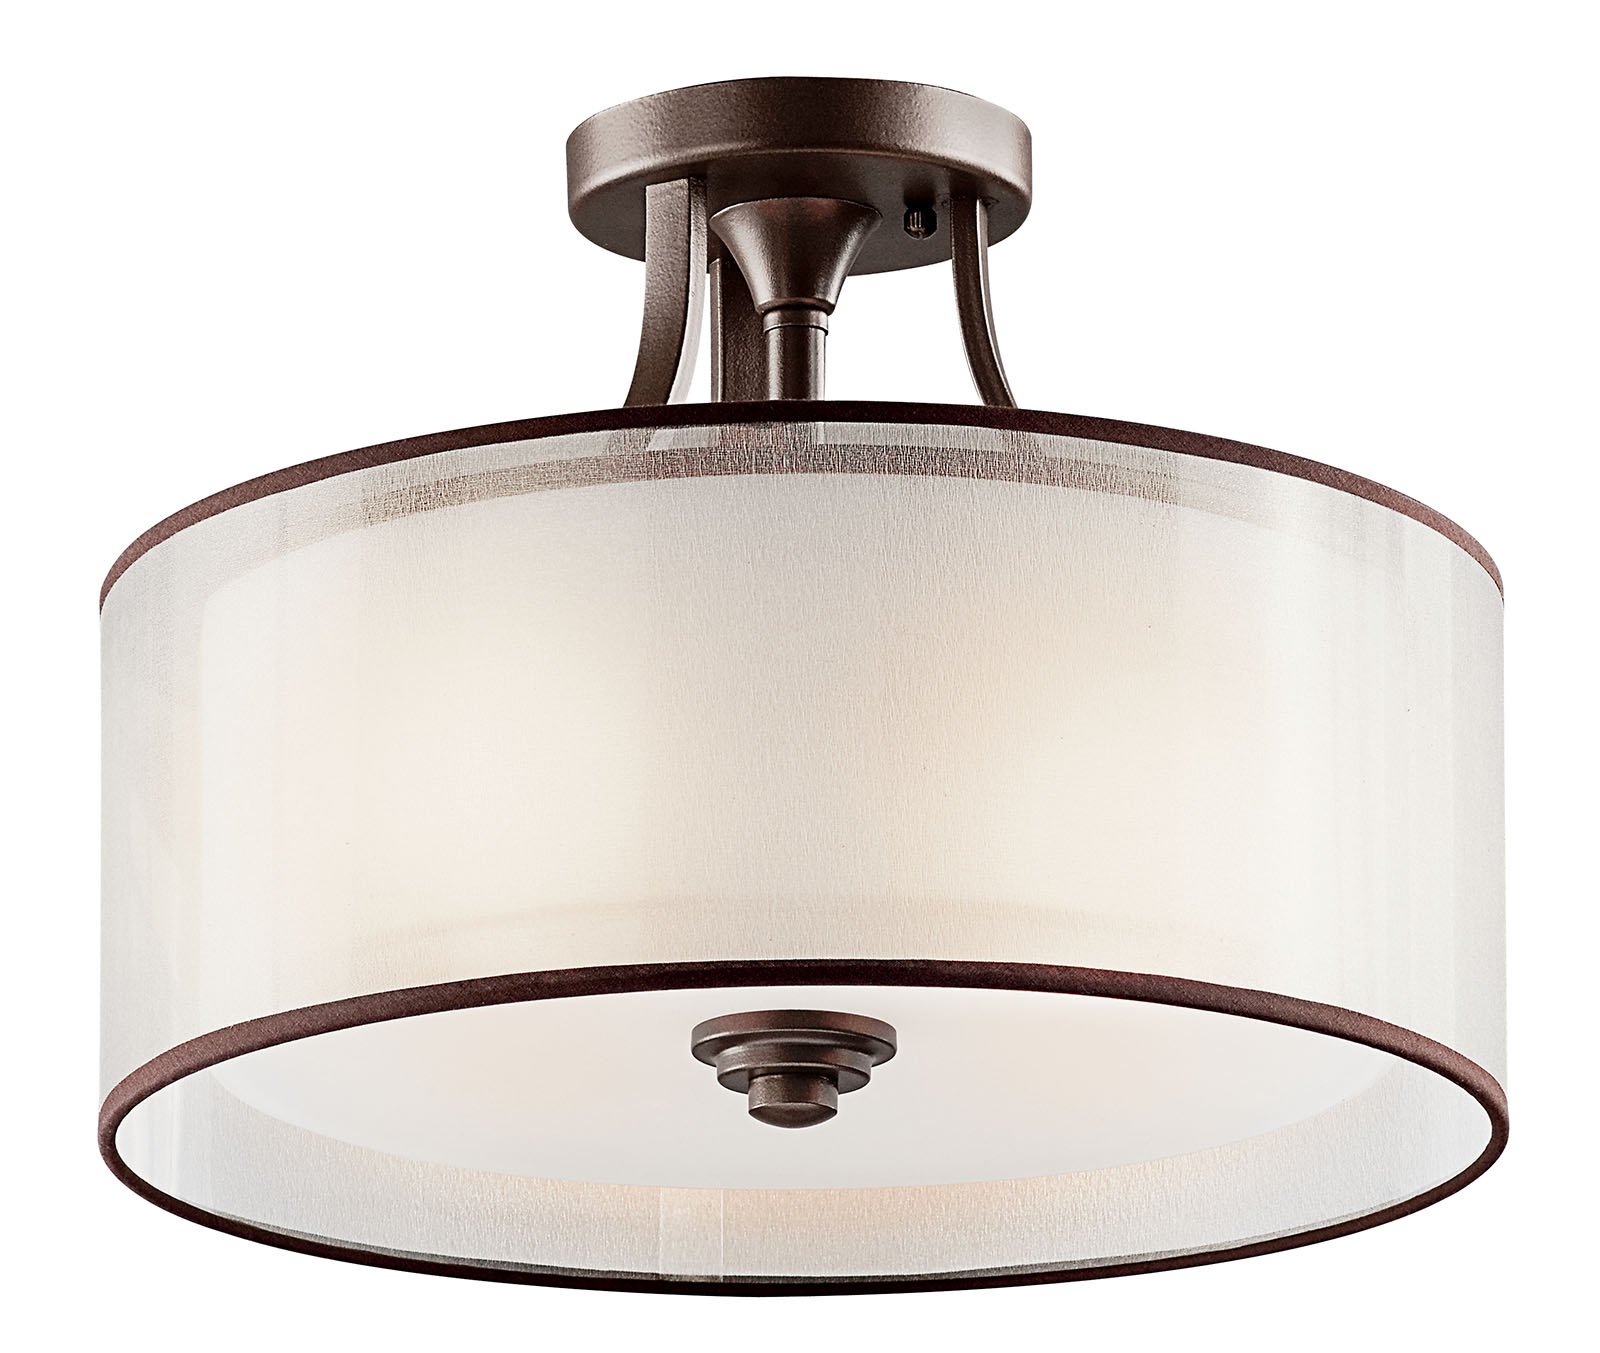 This 3 light semi-flush from the Lacey(TM) Collection offers a beautiful contrast, melding the charm of Olde World style with clean modern-day materials. It starts with our new Mission Bronze(TM) Finish and bold, unadorned rounded-arm styling. It finishes with avant-garde double shades made of decorative mesh screens and satin etched white inner glass.